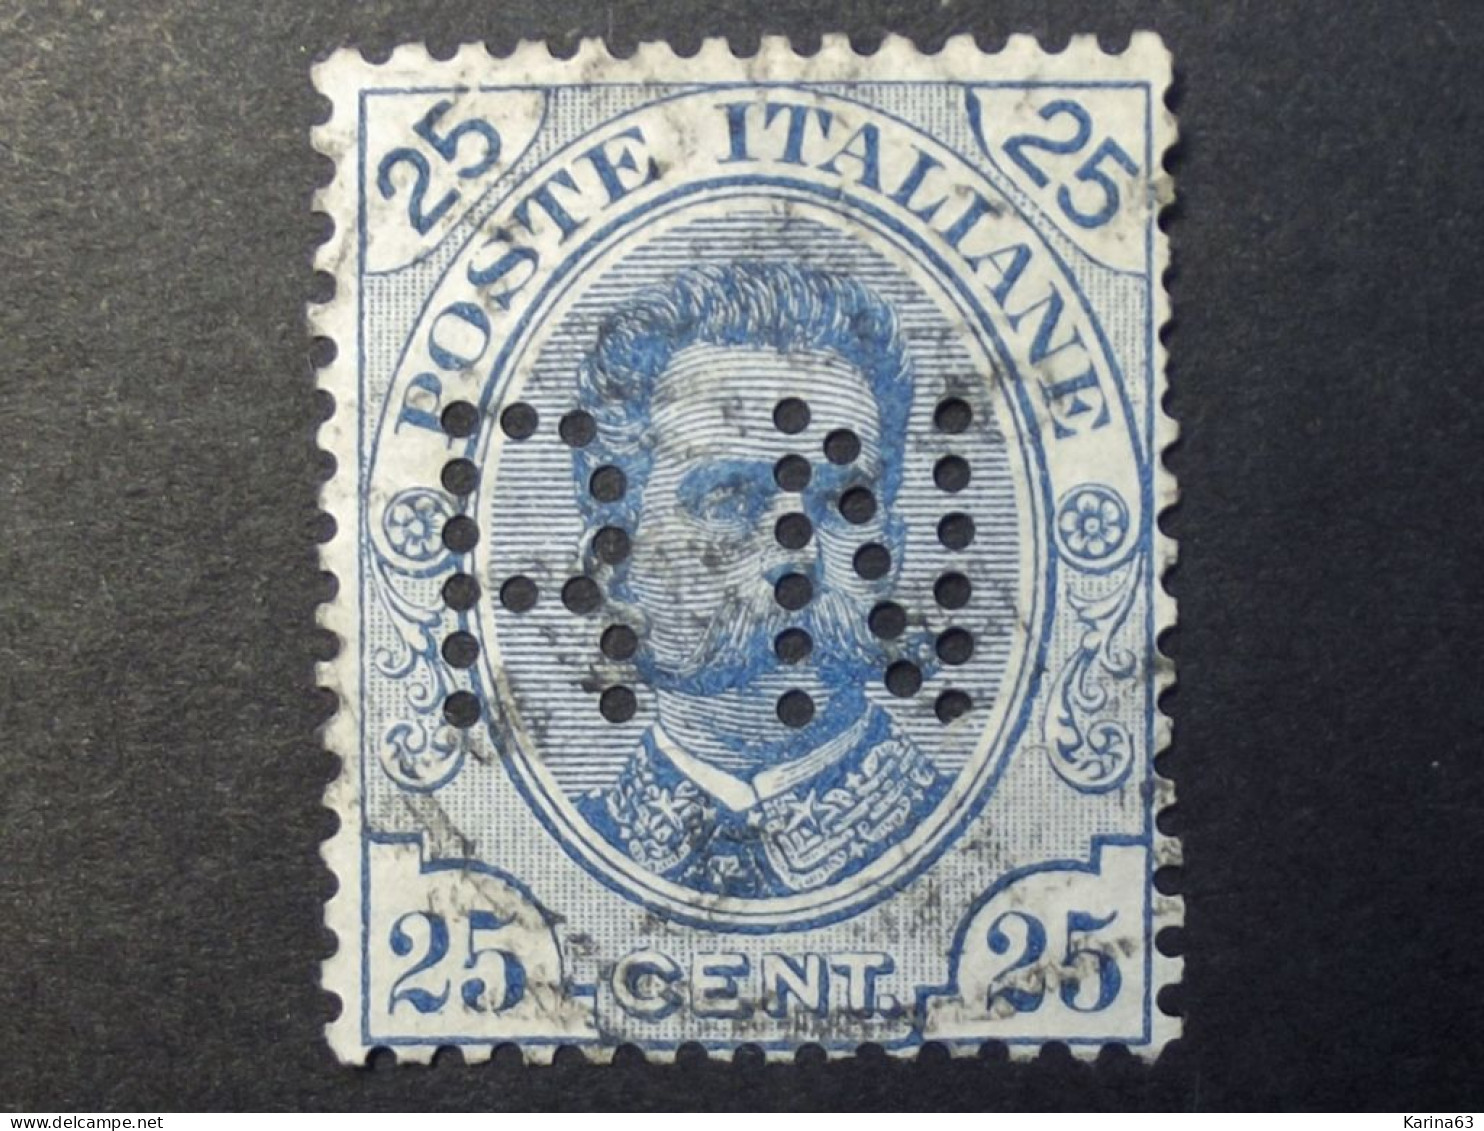 Italia - Italy - 1891  -  Perfin - Lochung -  R N  -  Cancelled - Afgestempeld